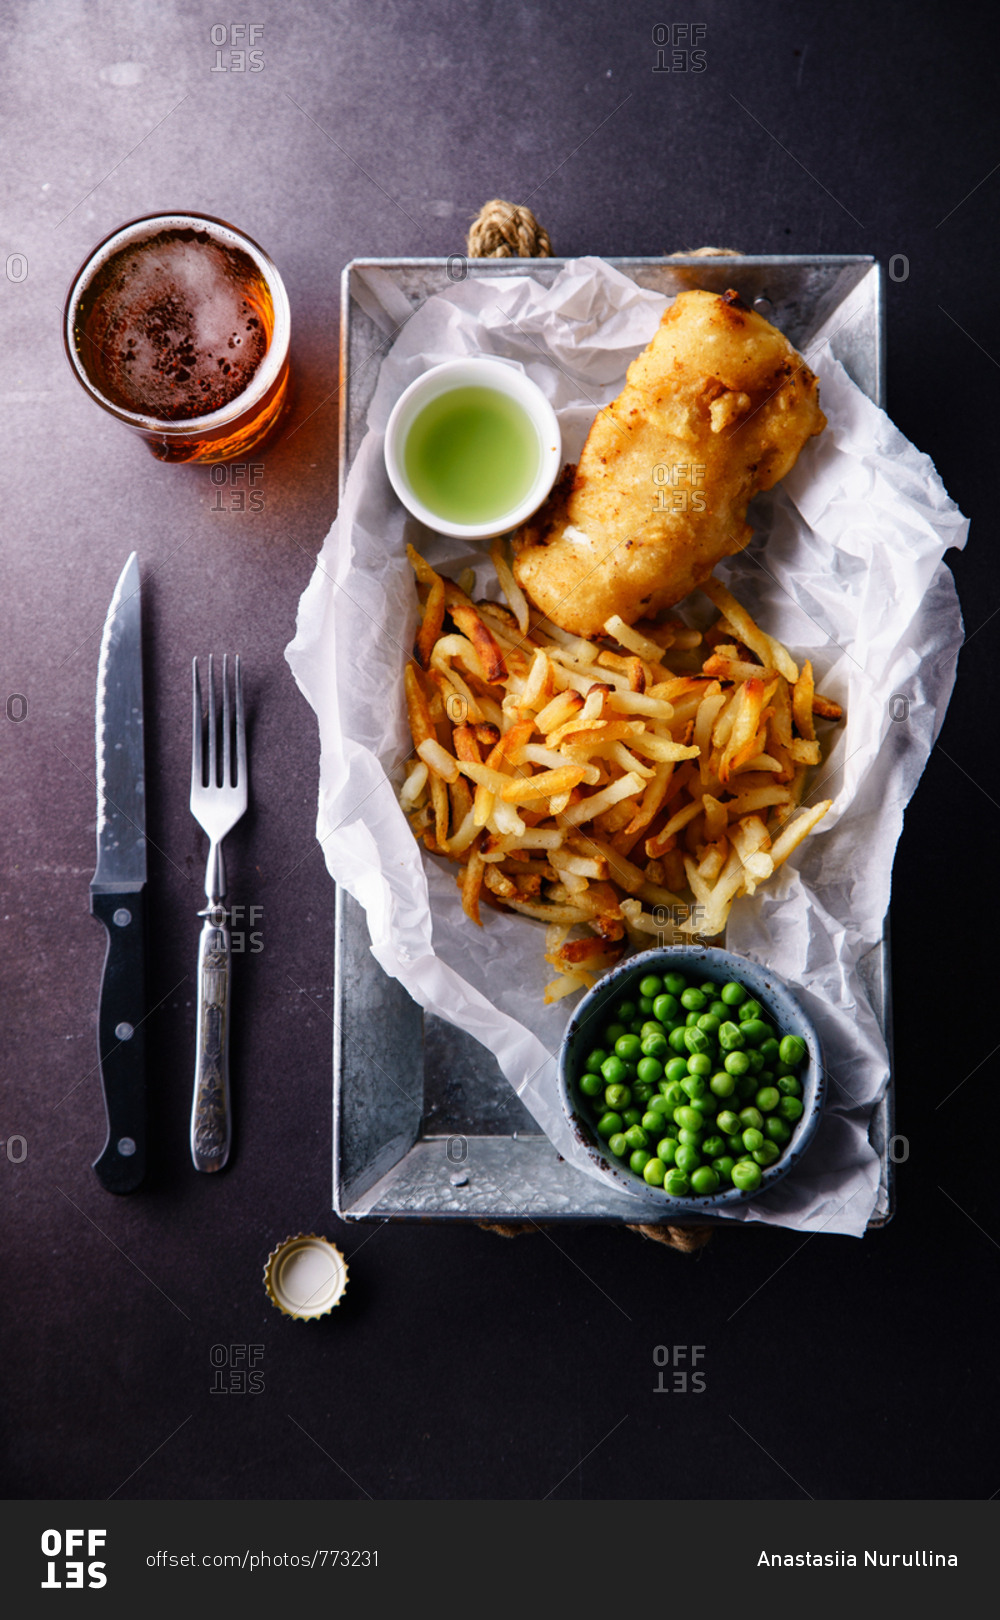 Fish and chips with a glass of beer. British traditional fast food